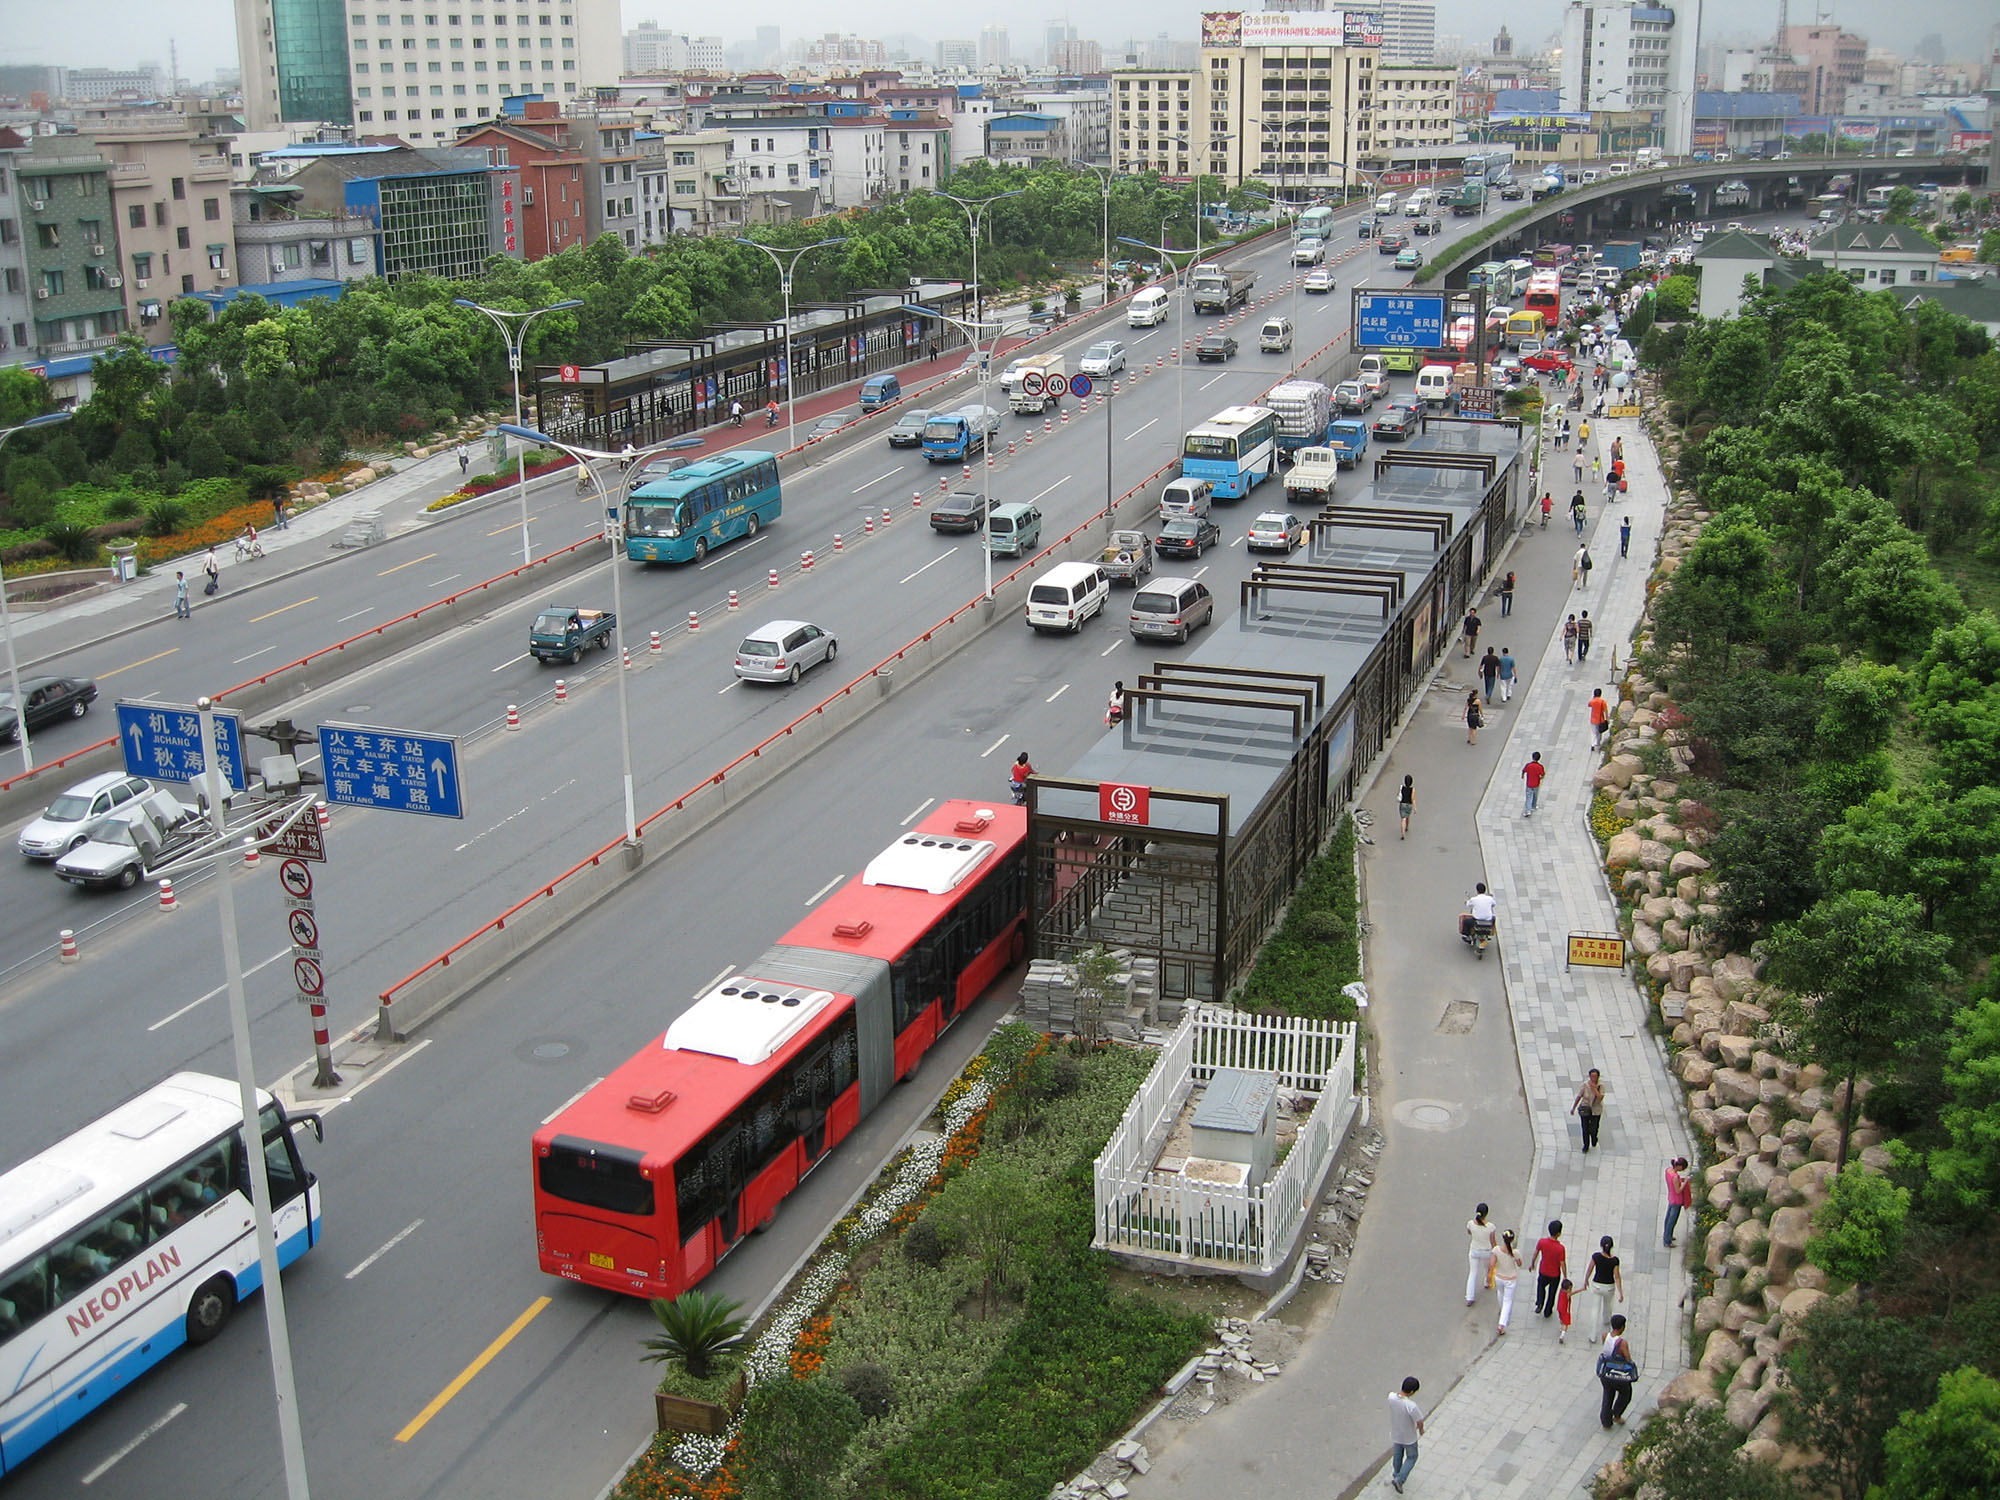 Fig. 31.14 The bike lane along the Hangzhou, China, BRT system is sited between the BRT lane and the sidewalk.